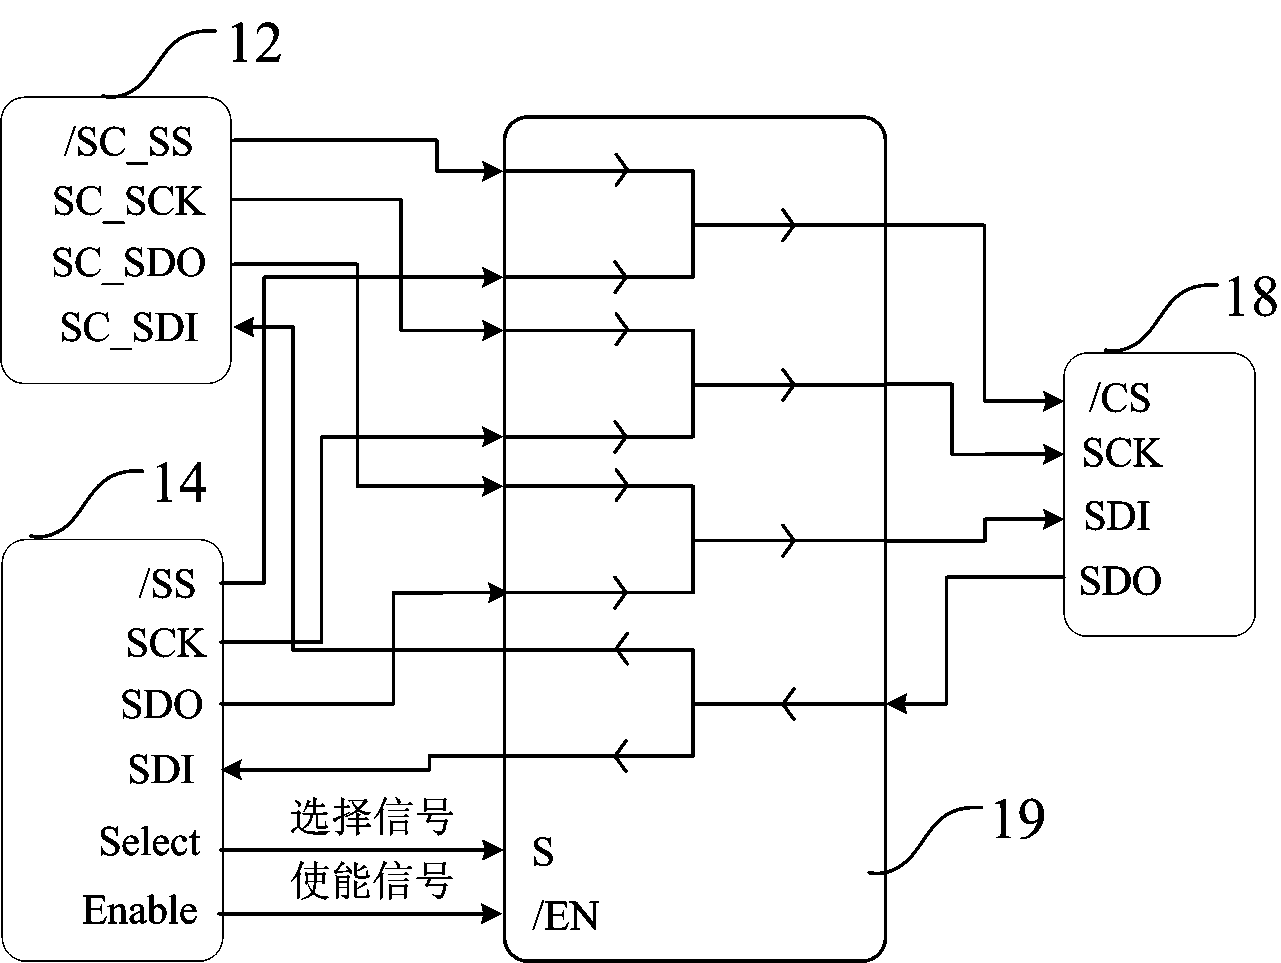 FPGA (Field Programmable Gate Array)-based on-orbit reconfiguration system and method for satellite on-board computer